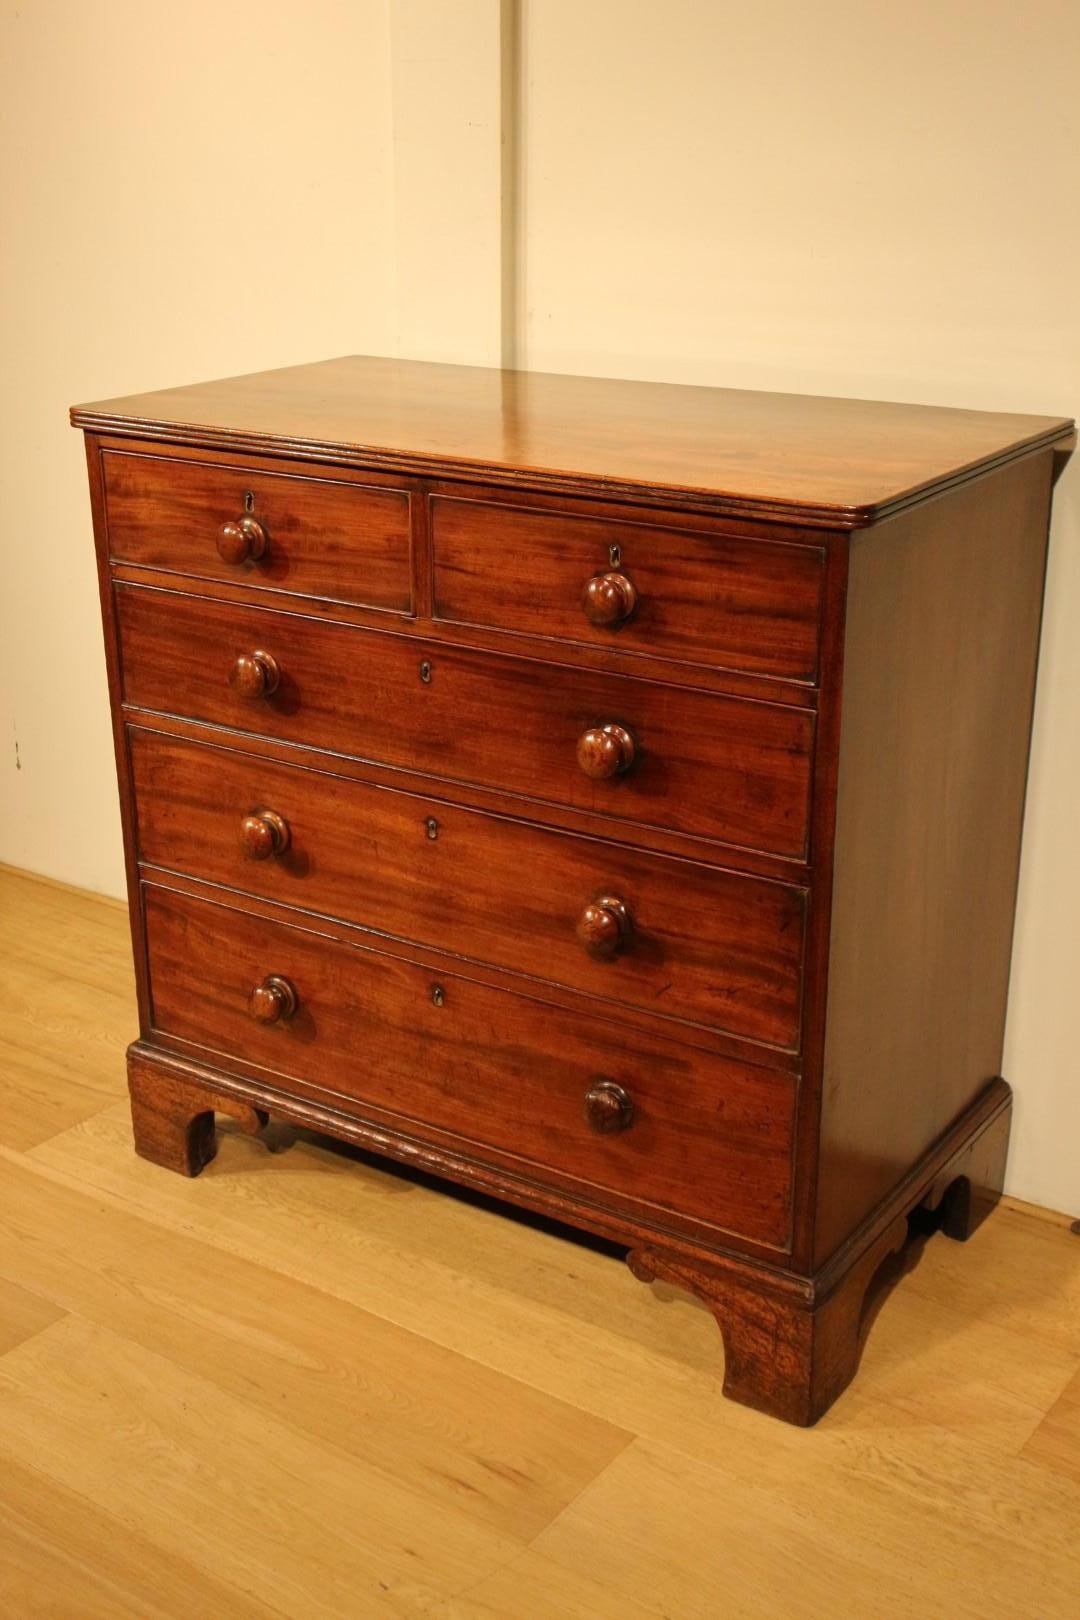 Beautiful antique 18th century mahogany chest of drawers in perfect condition. The chest of drawers has a beautiful patina. Warm and weathered color. And that is actually the most important thing with a purely antique chest of drawers. Circles and